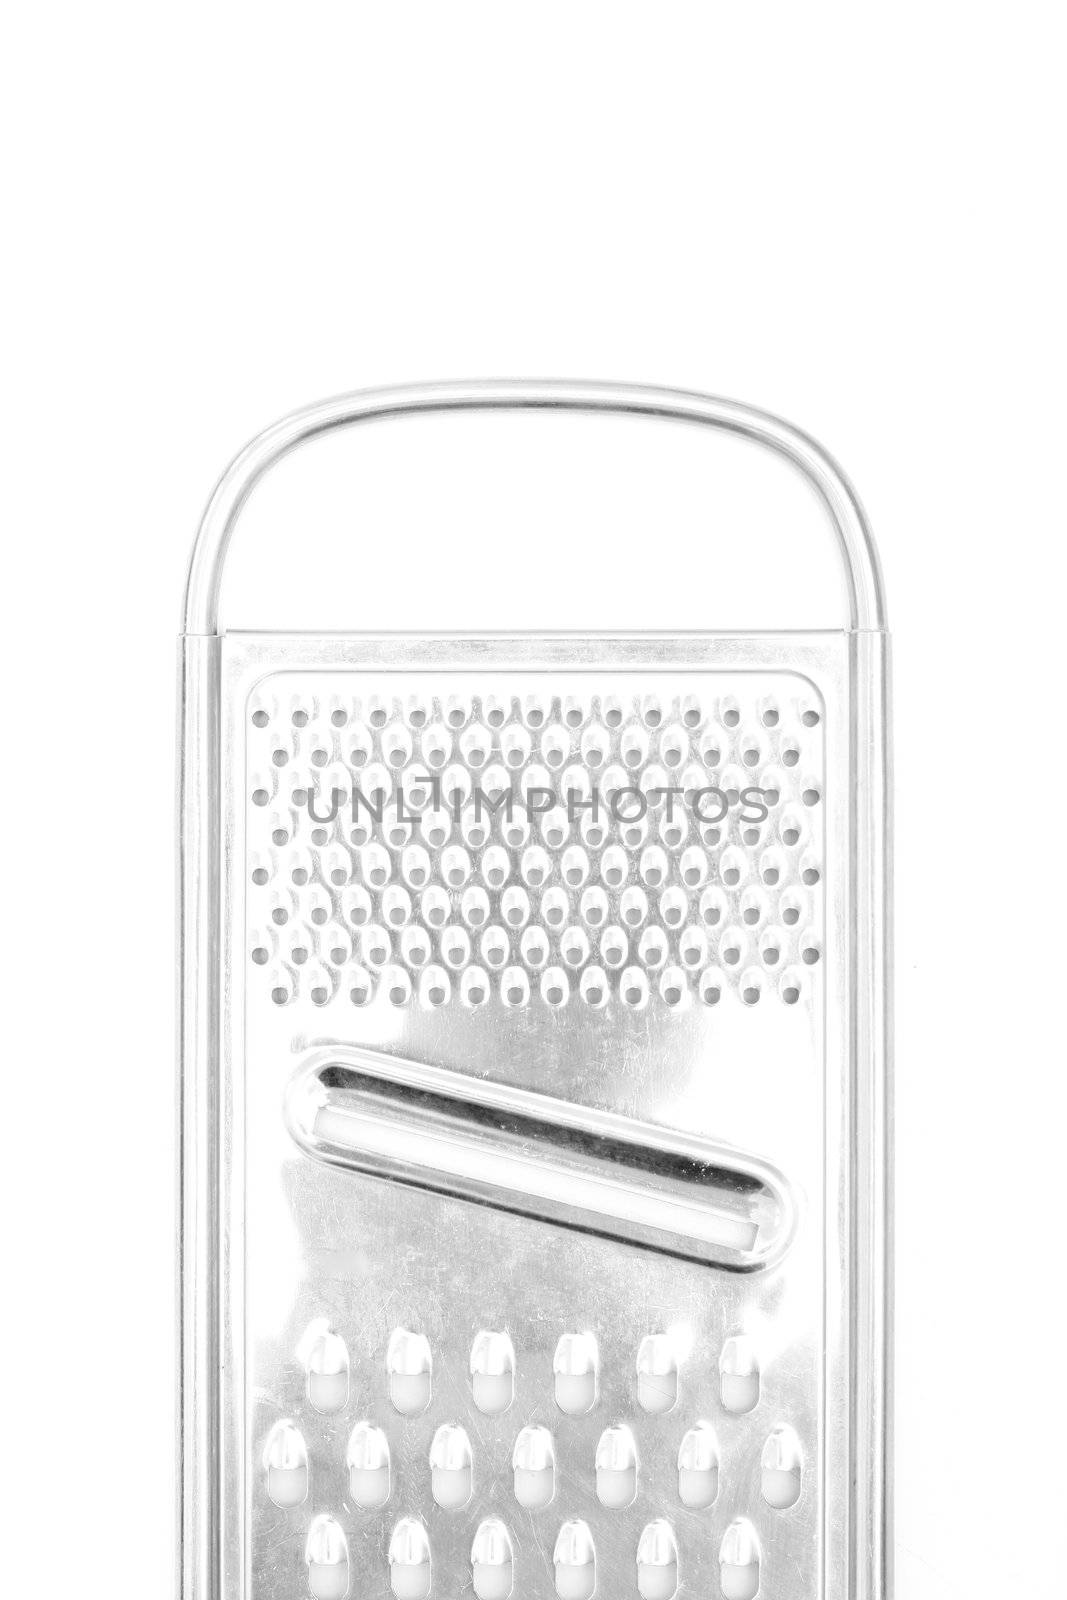 A silver grater isolated on white